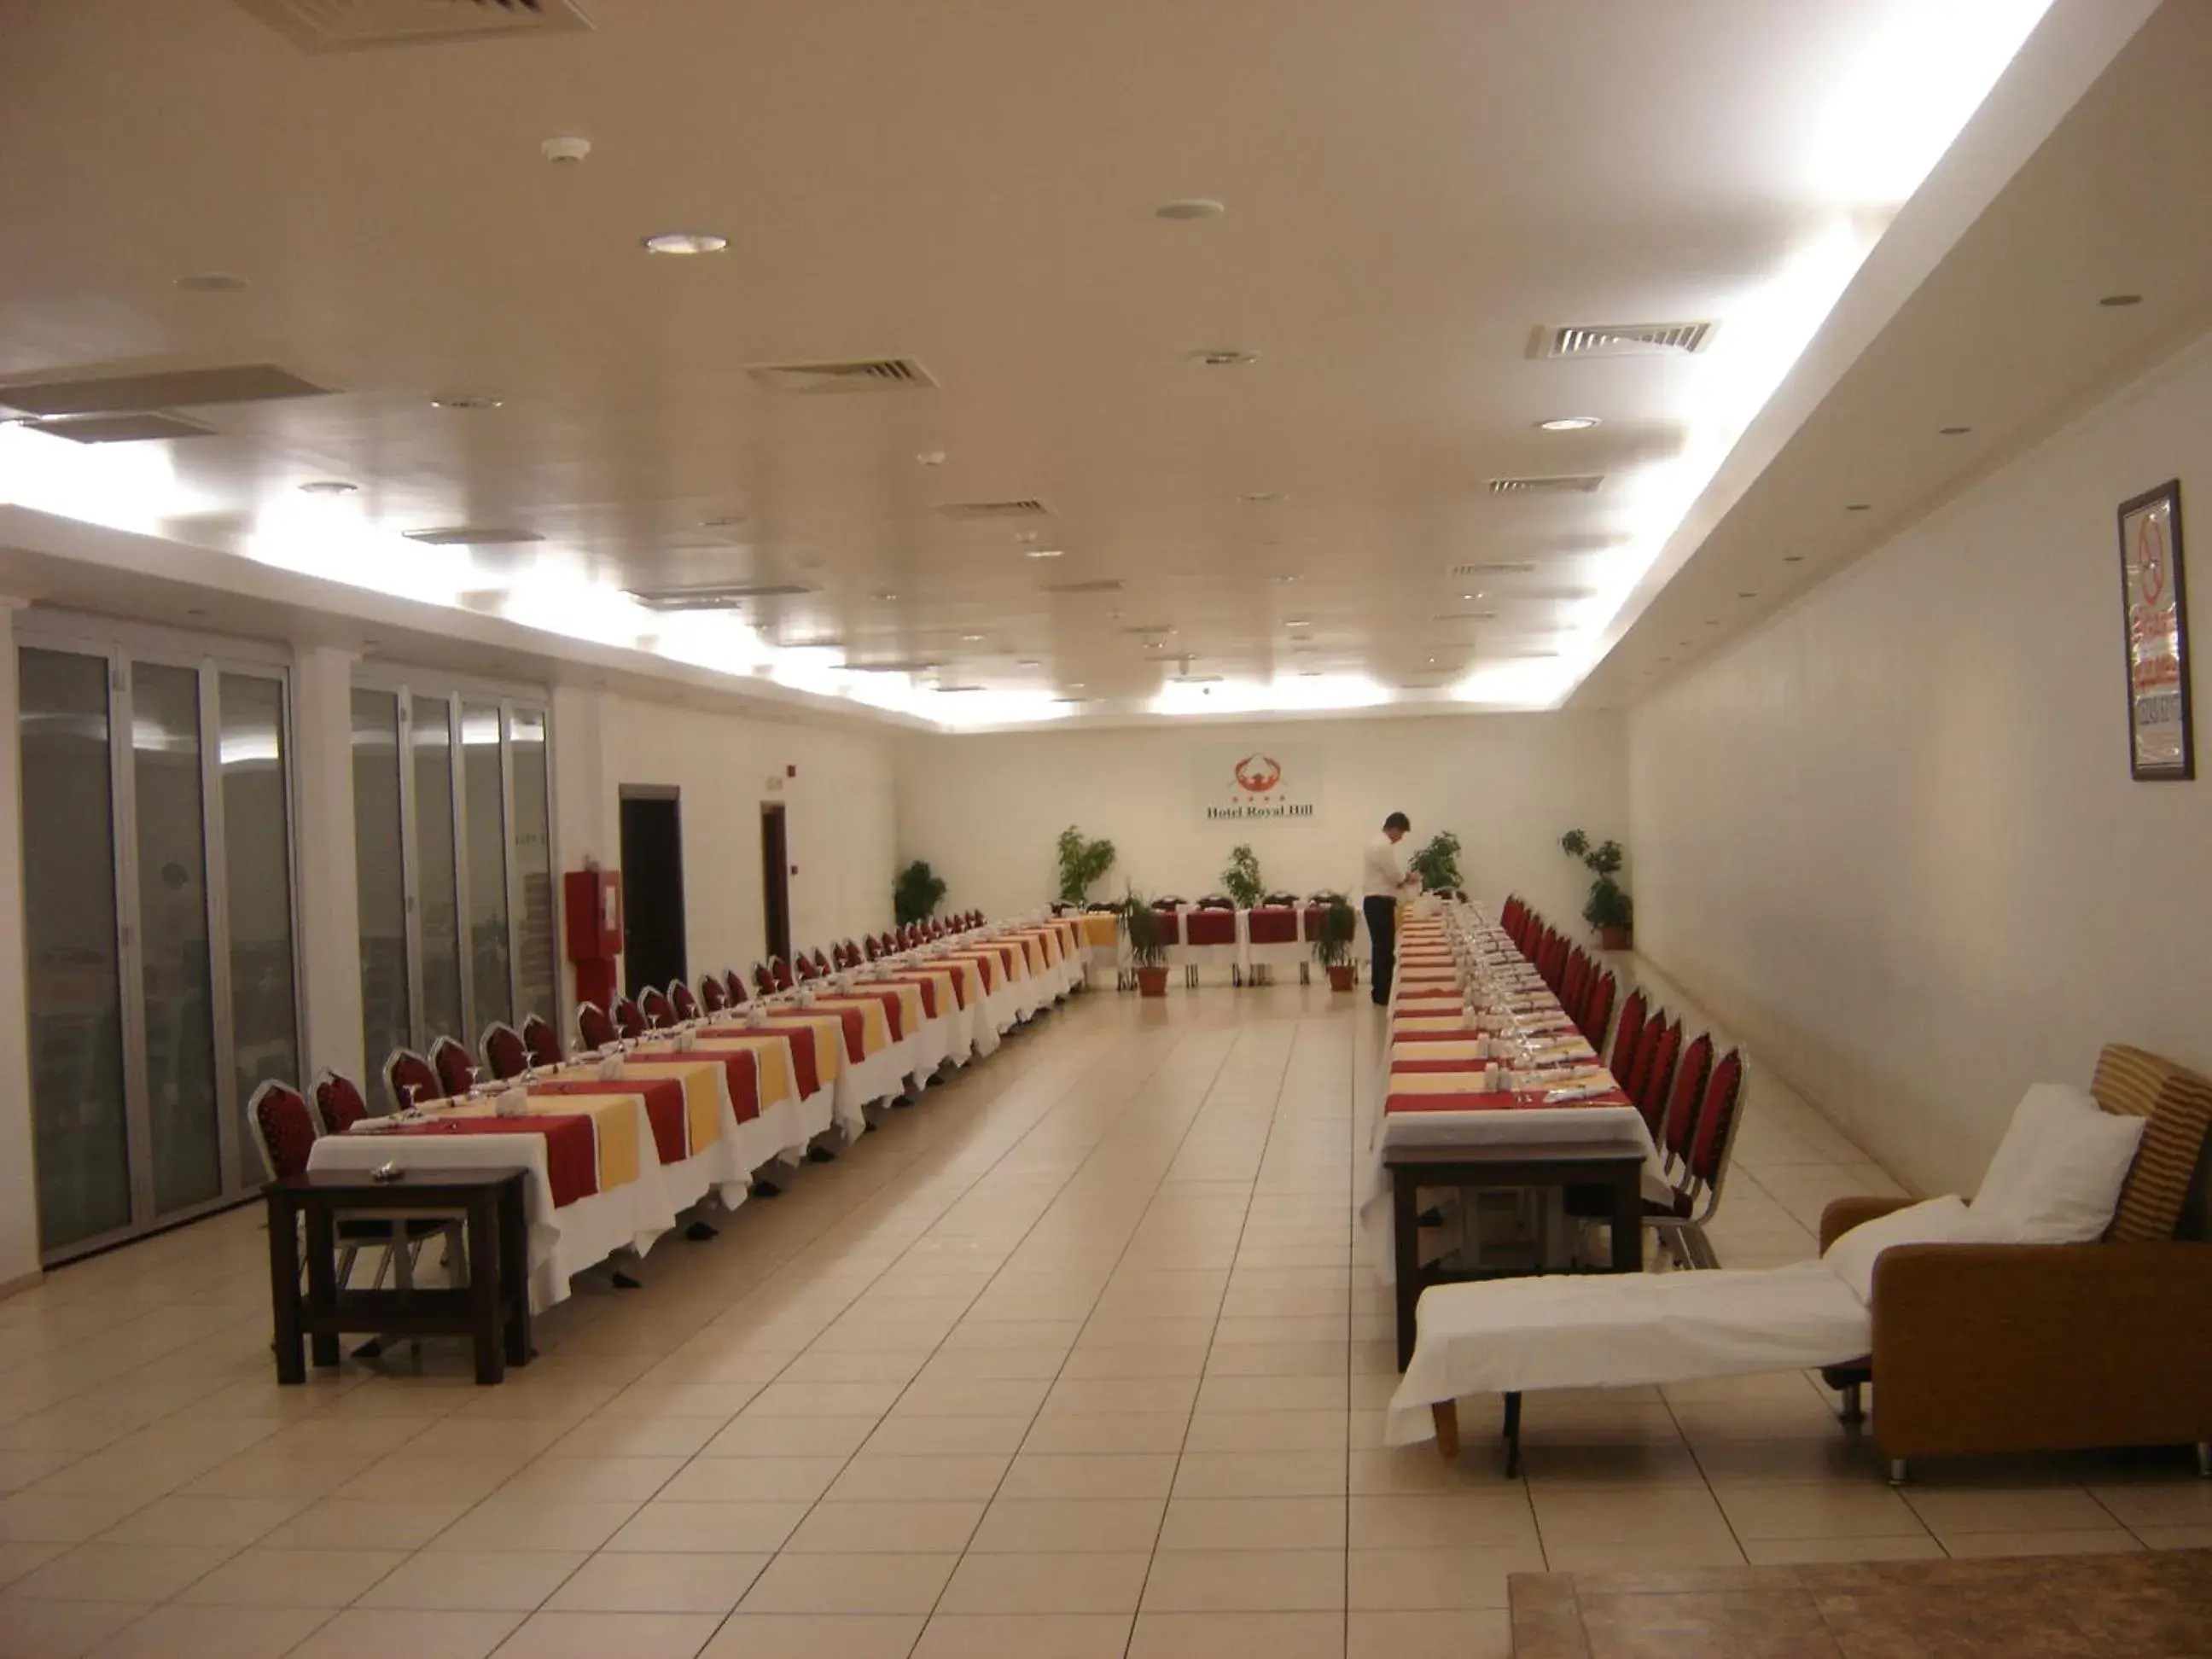 Business facilities in Hotel Royal Hill